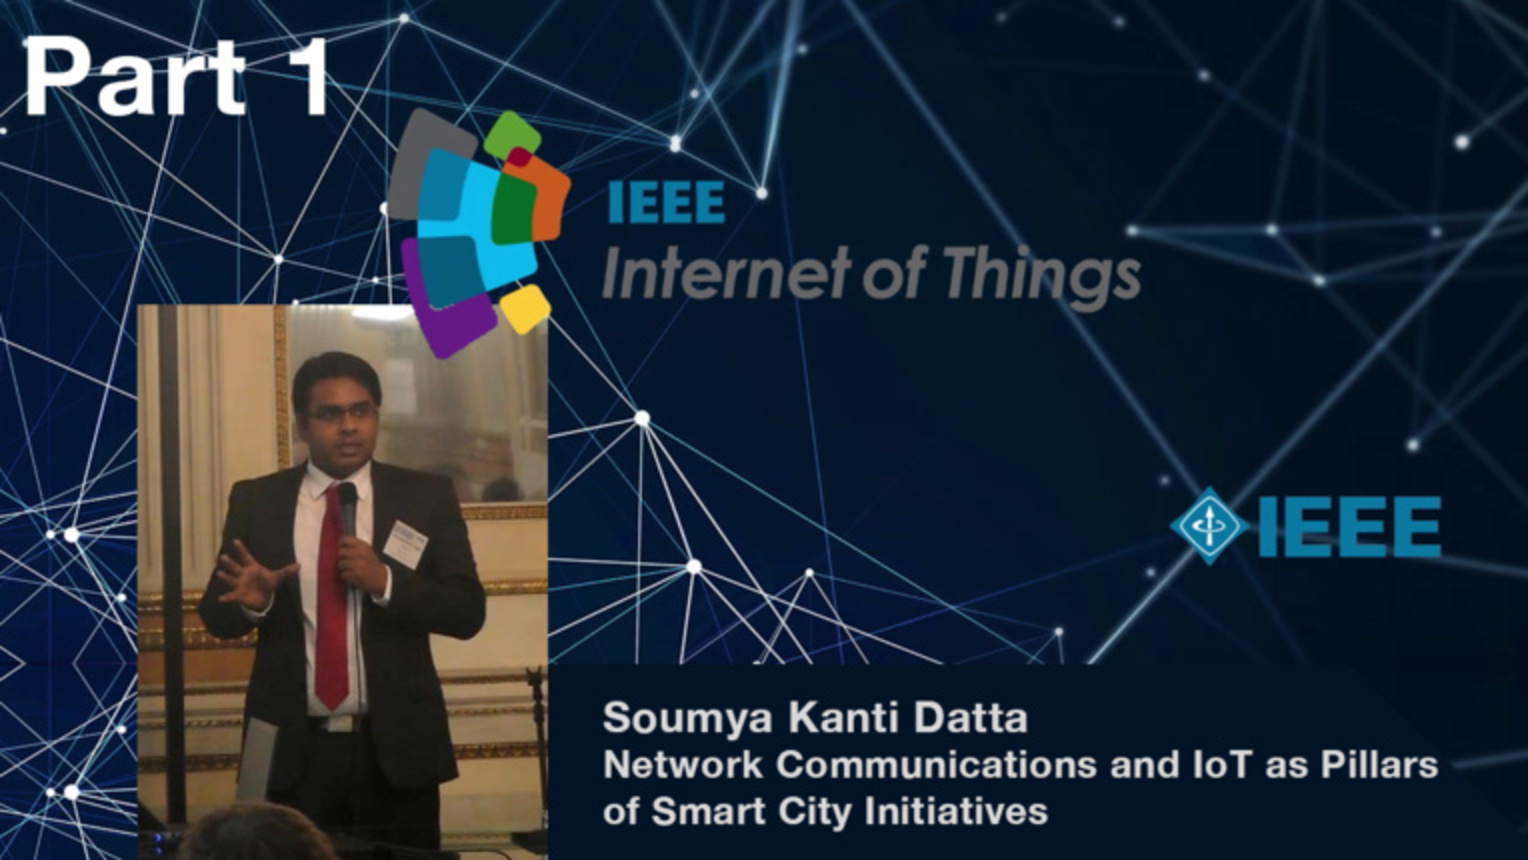 Part 1: Network Communications and Internet of Things as Pillars of Smart City Initiatives - Soumya Kanti Datta, IEEE WF-IoT 2015